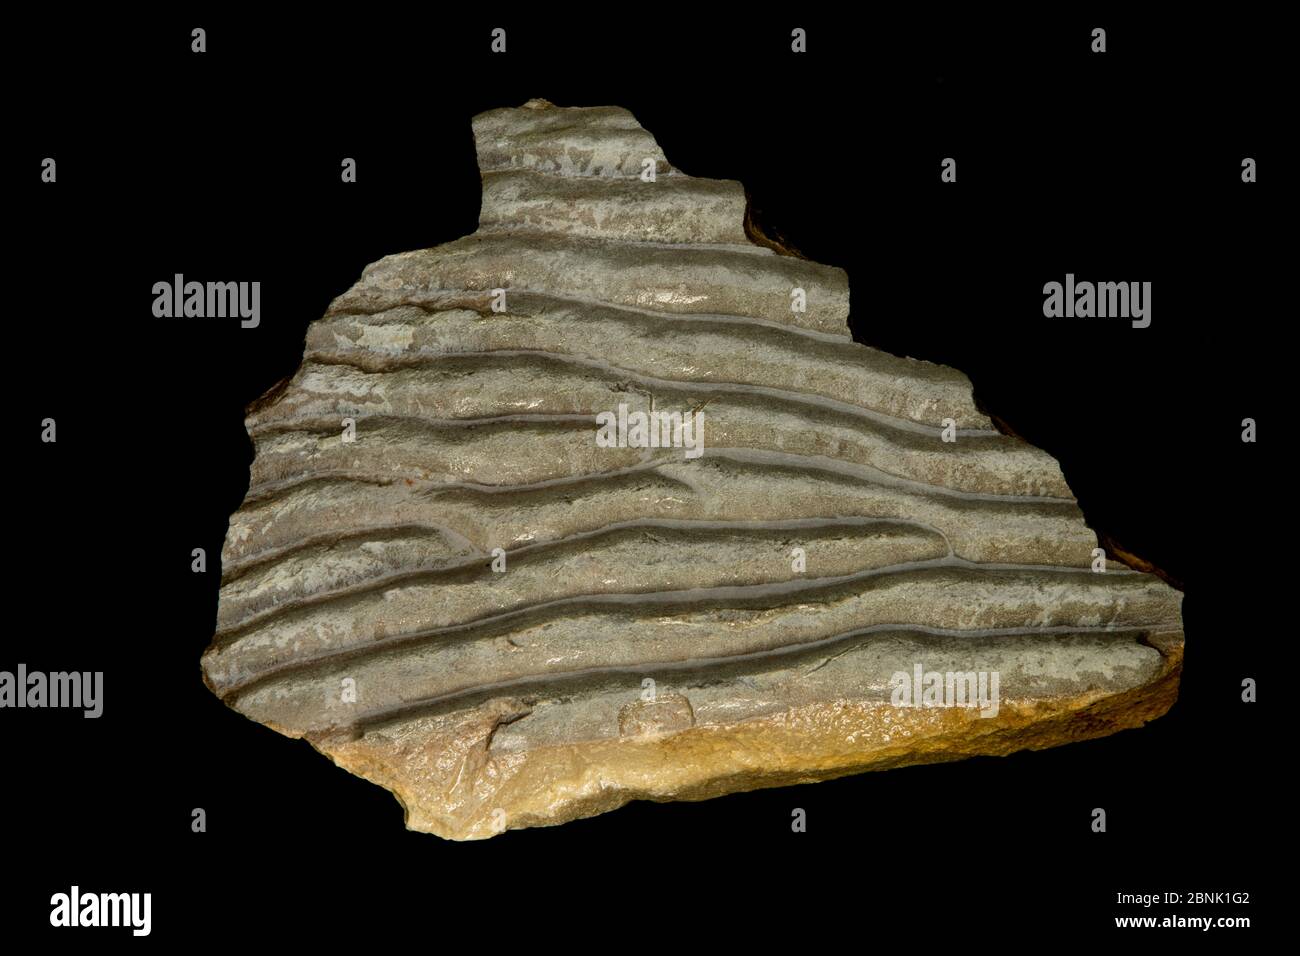 Fossil ripple marks, from Rocky Mountain Belt Supergroup, northwestern Montana, USA. Pre-Cambrian rock from 600 million years to 1 billion years ago. Stock Photo